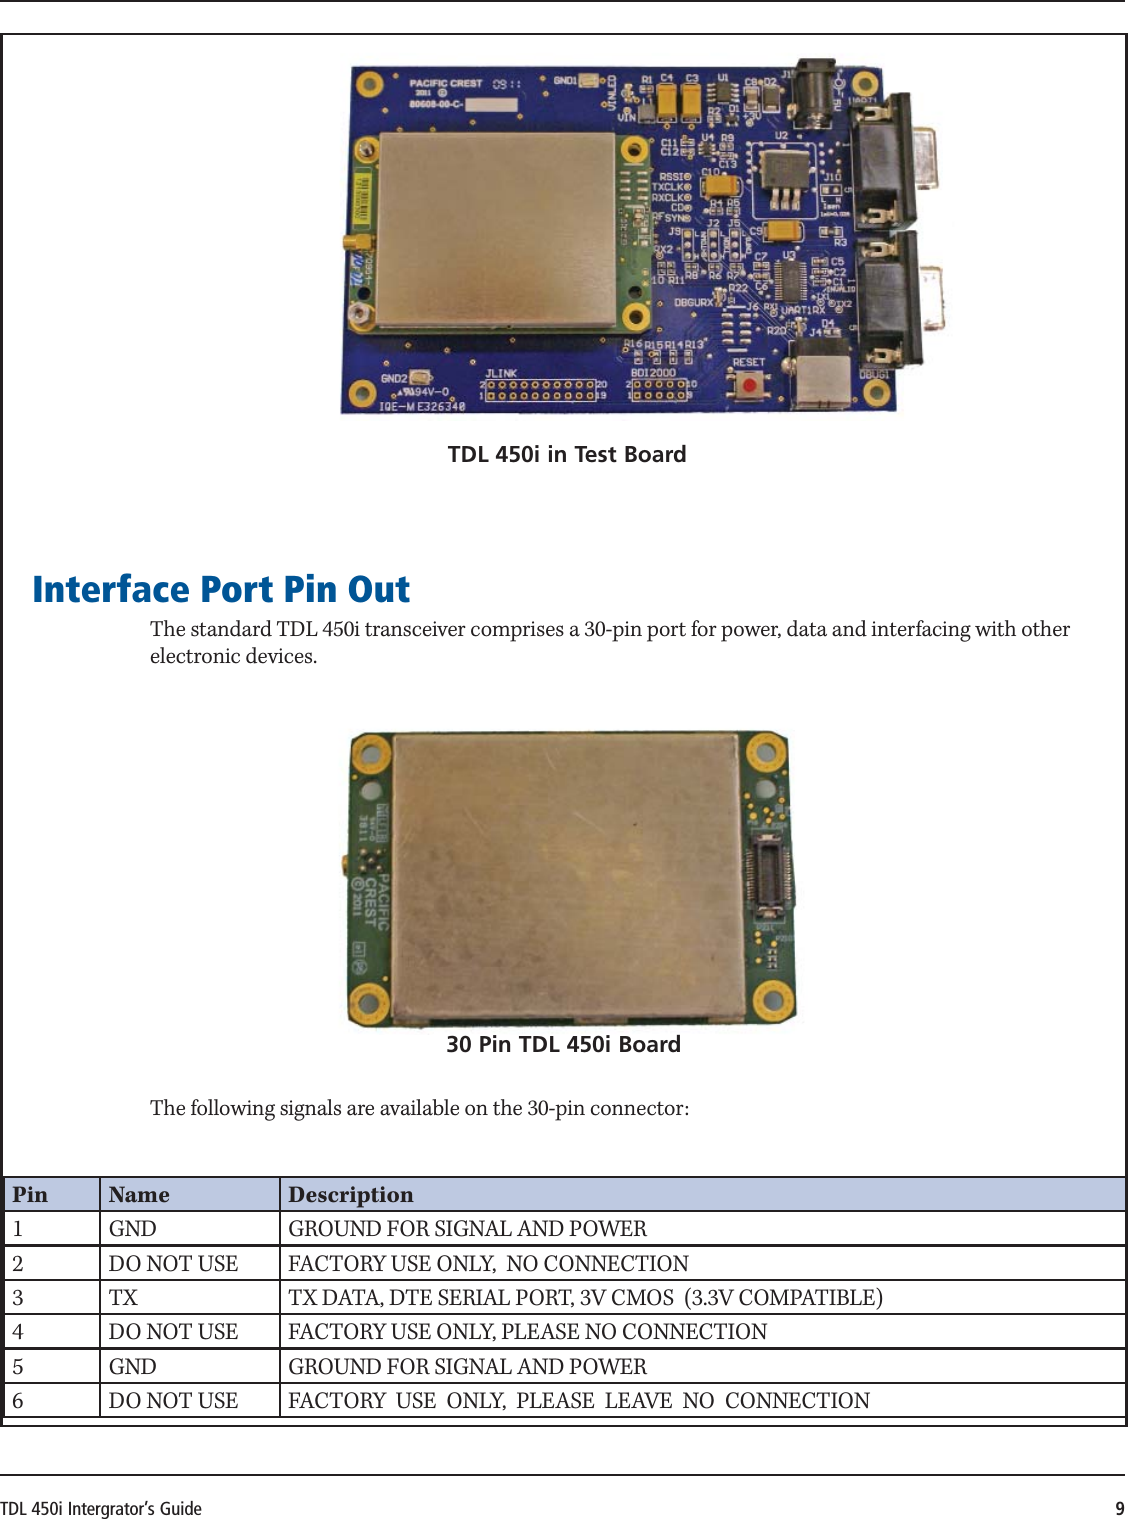 TDL 450i Intergrator’s Guide 9 TDL 450i in Test BoardInterface Port Pin OutThe standard TDL 450i transceiver comprises a 30-pin port for power, data and interfacing with other electronic devices. 30 Pin TDL 450i BoardThe following signals are available on the 30-pin connector: Pin Name Description1 GND GROUND FOR SIGNAL AND POWER2 DO NOT USE FACTORY USE ONLY,  NO CONNECTION3 TX TX DATA, DTE SERIAL PORT, 3V CMOS  (3.3V COMPATIBLE)4 DO NOT USE FACTORY USE ONLY, PLEASE NO CONNECTION5 GND GROUND FOR SIGNAL AND POWER6 DO NOT USE FACTORY  USE  ONLY,  PLEASE  LEAVE  NO  CONNECTION